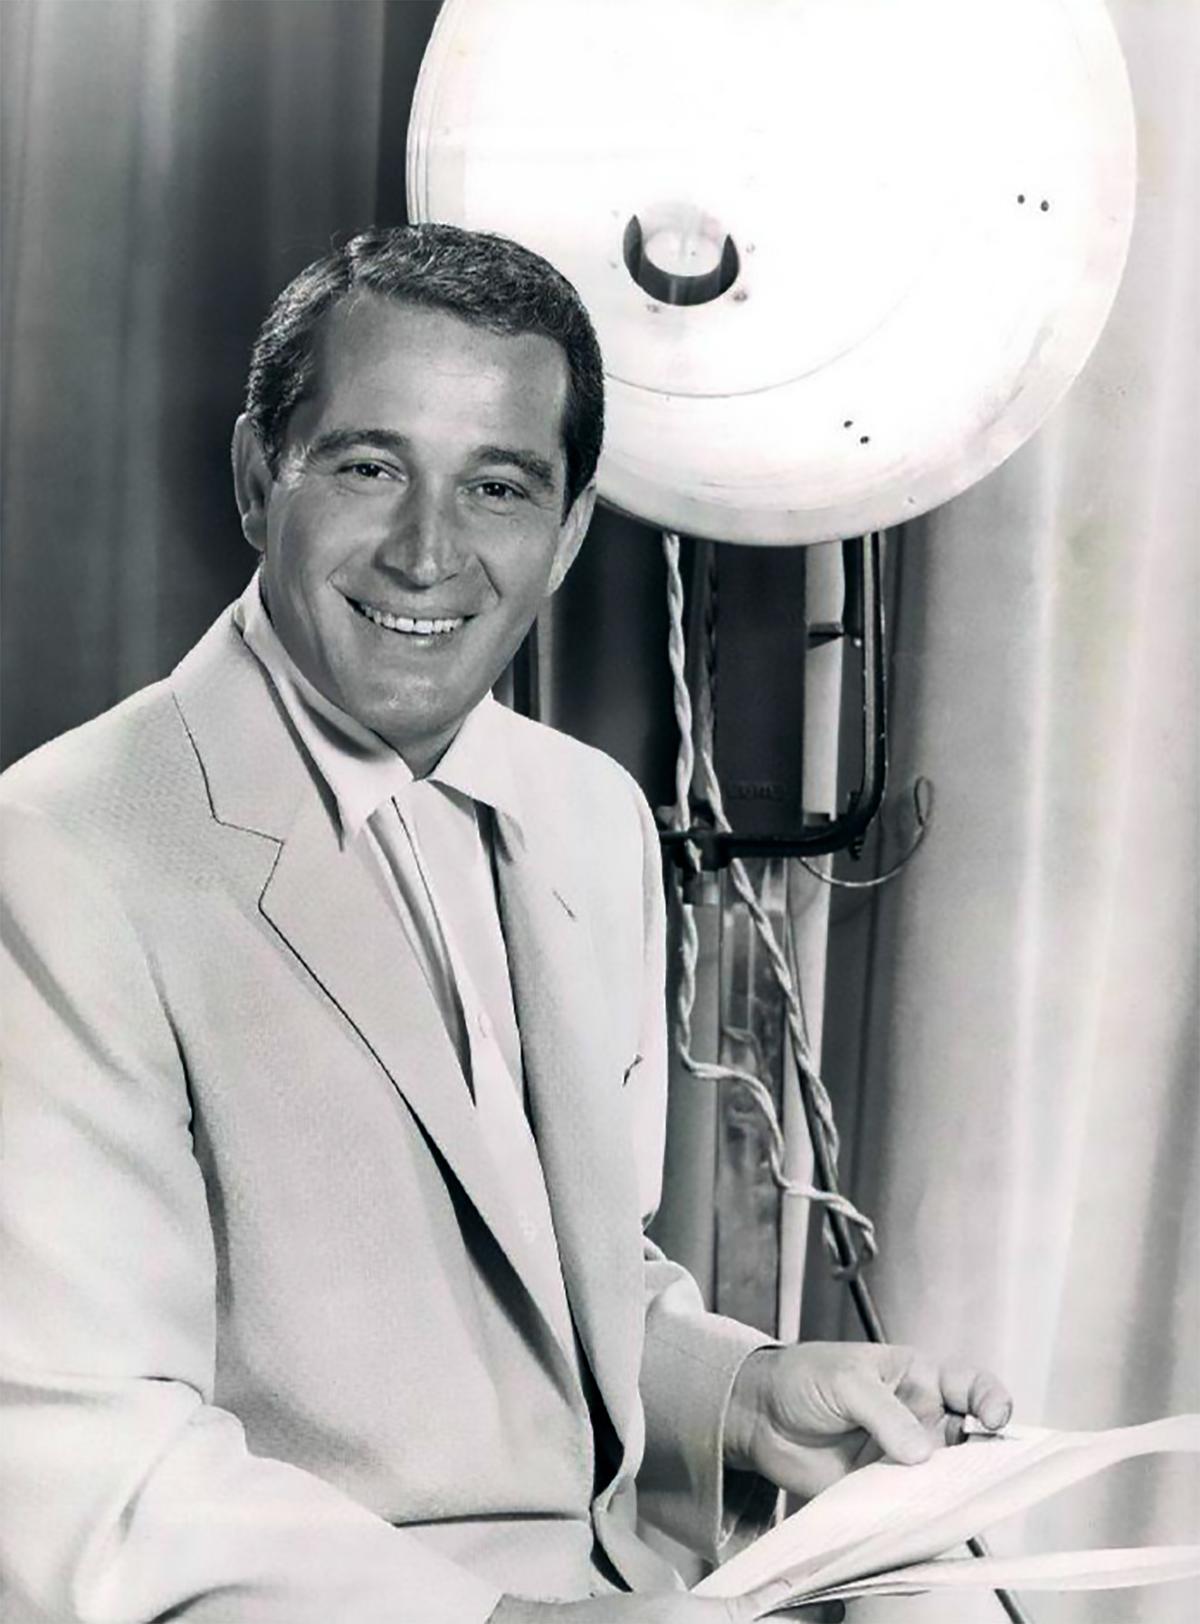 Como during the second season of his television program "The Perry Como Show," on Aug. 15, 1956. (Public Domain)